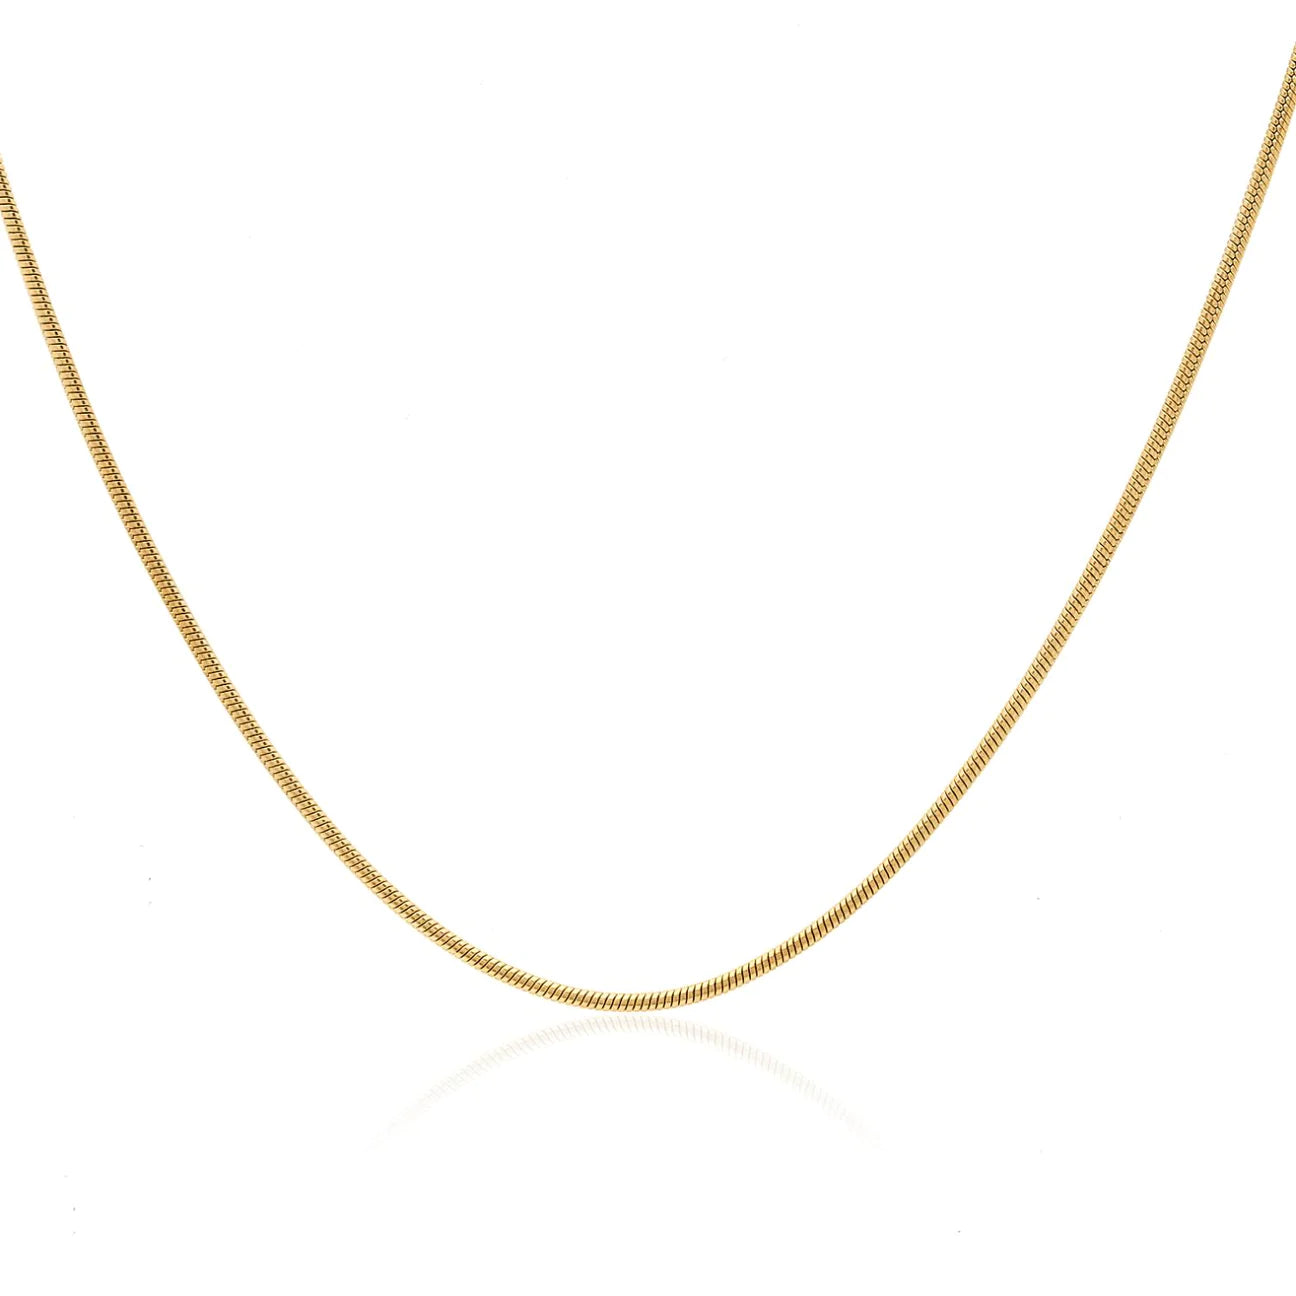 Men's Edit / Roma / Necklace / Gold Plated Stainless Steel